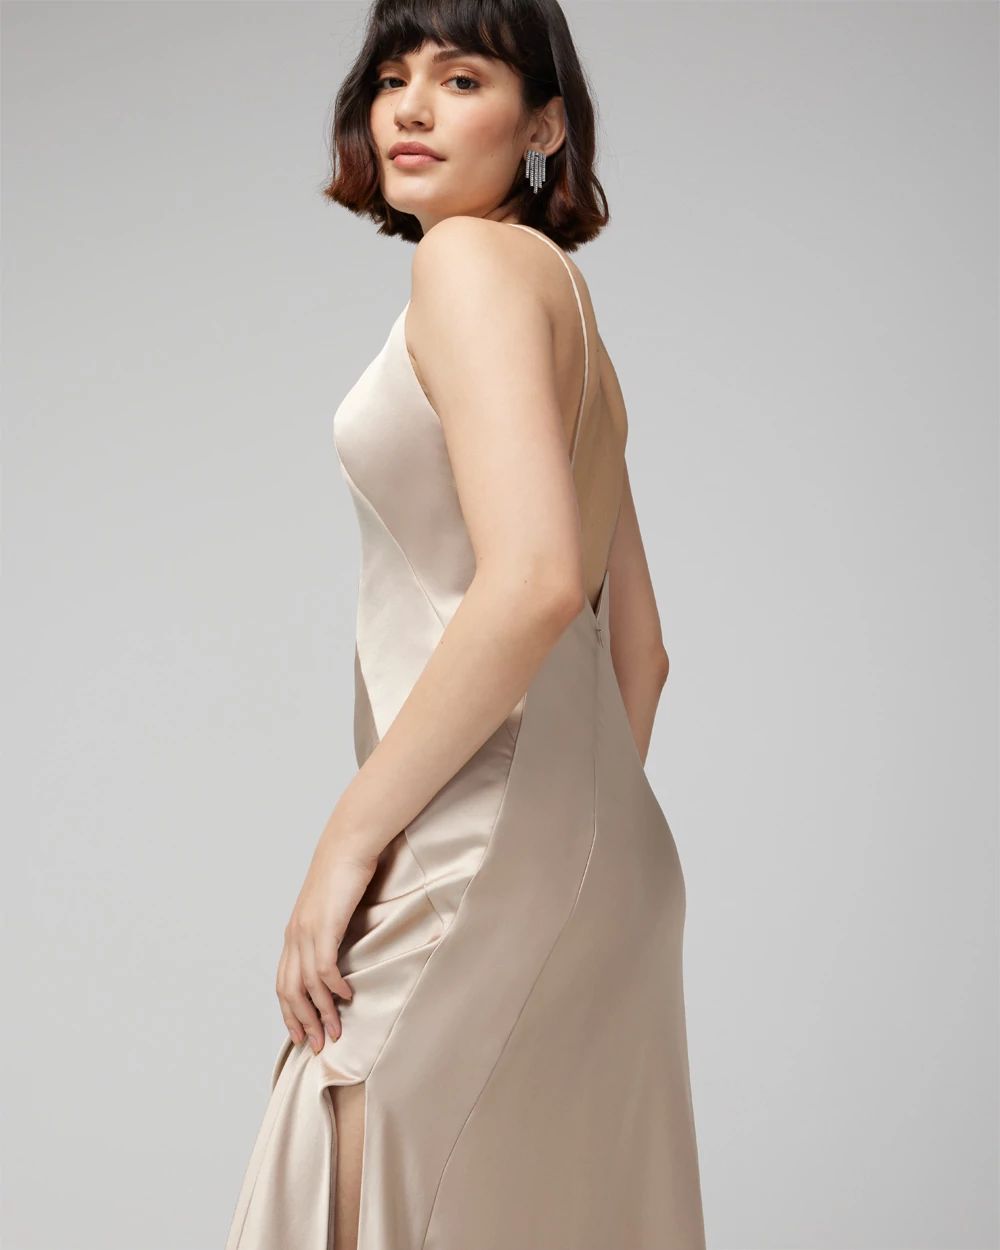 V-Neck Low Back Satin Gown click to view larger image.